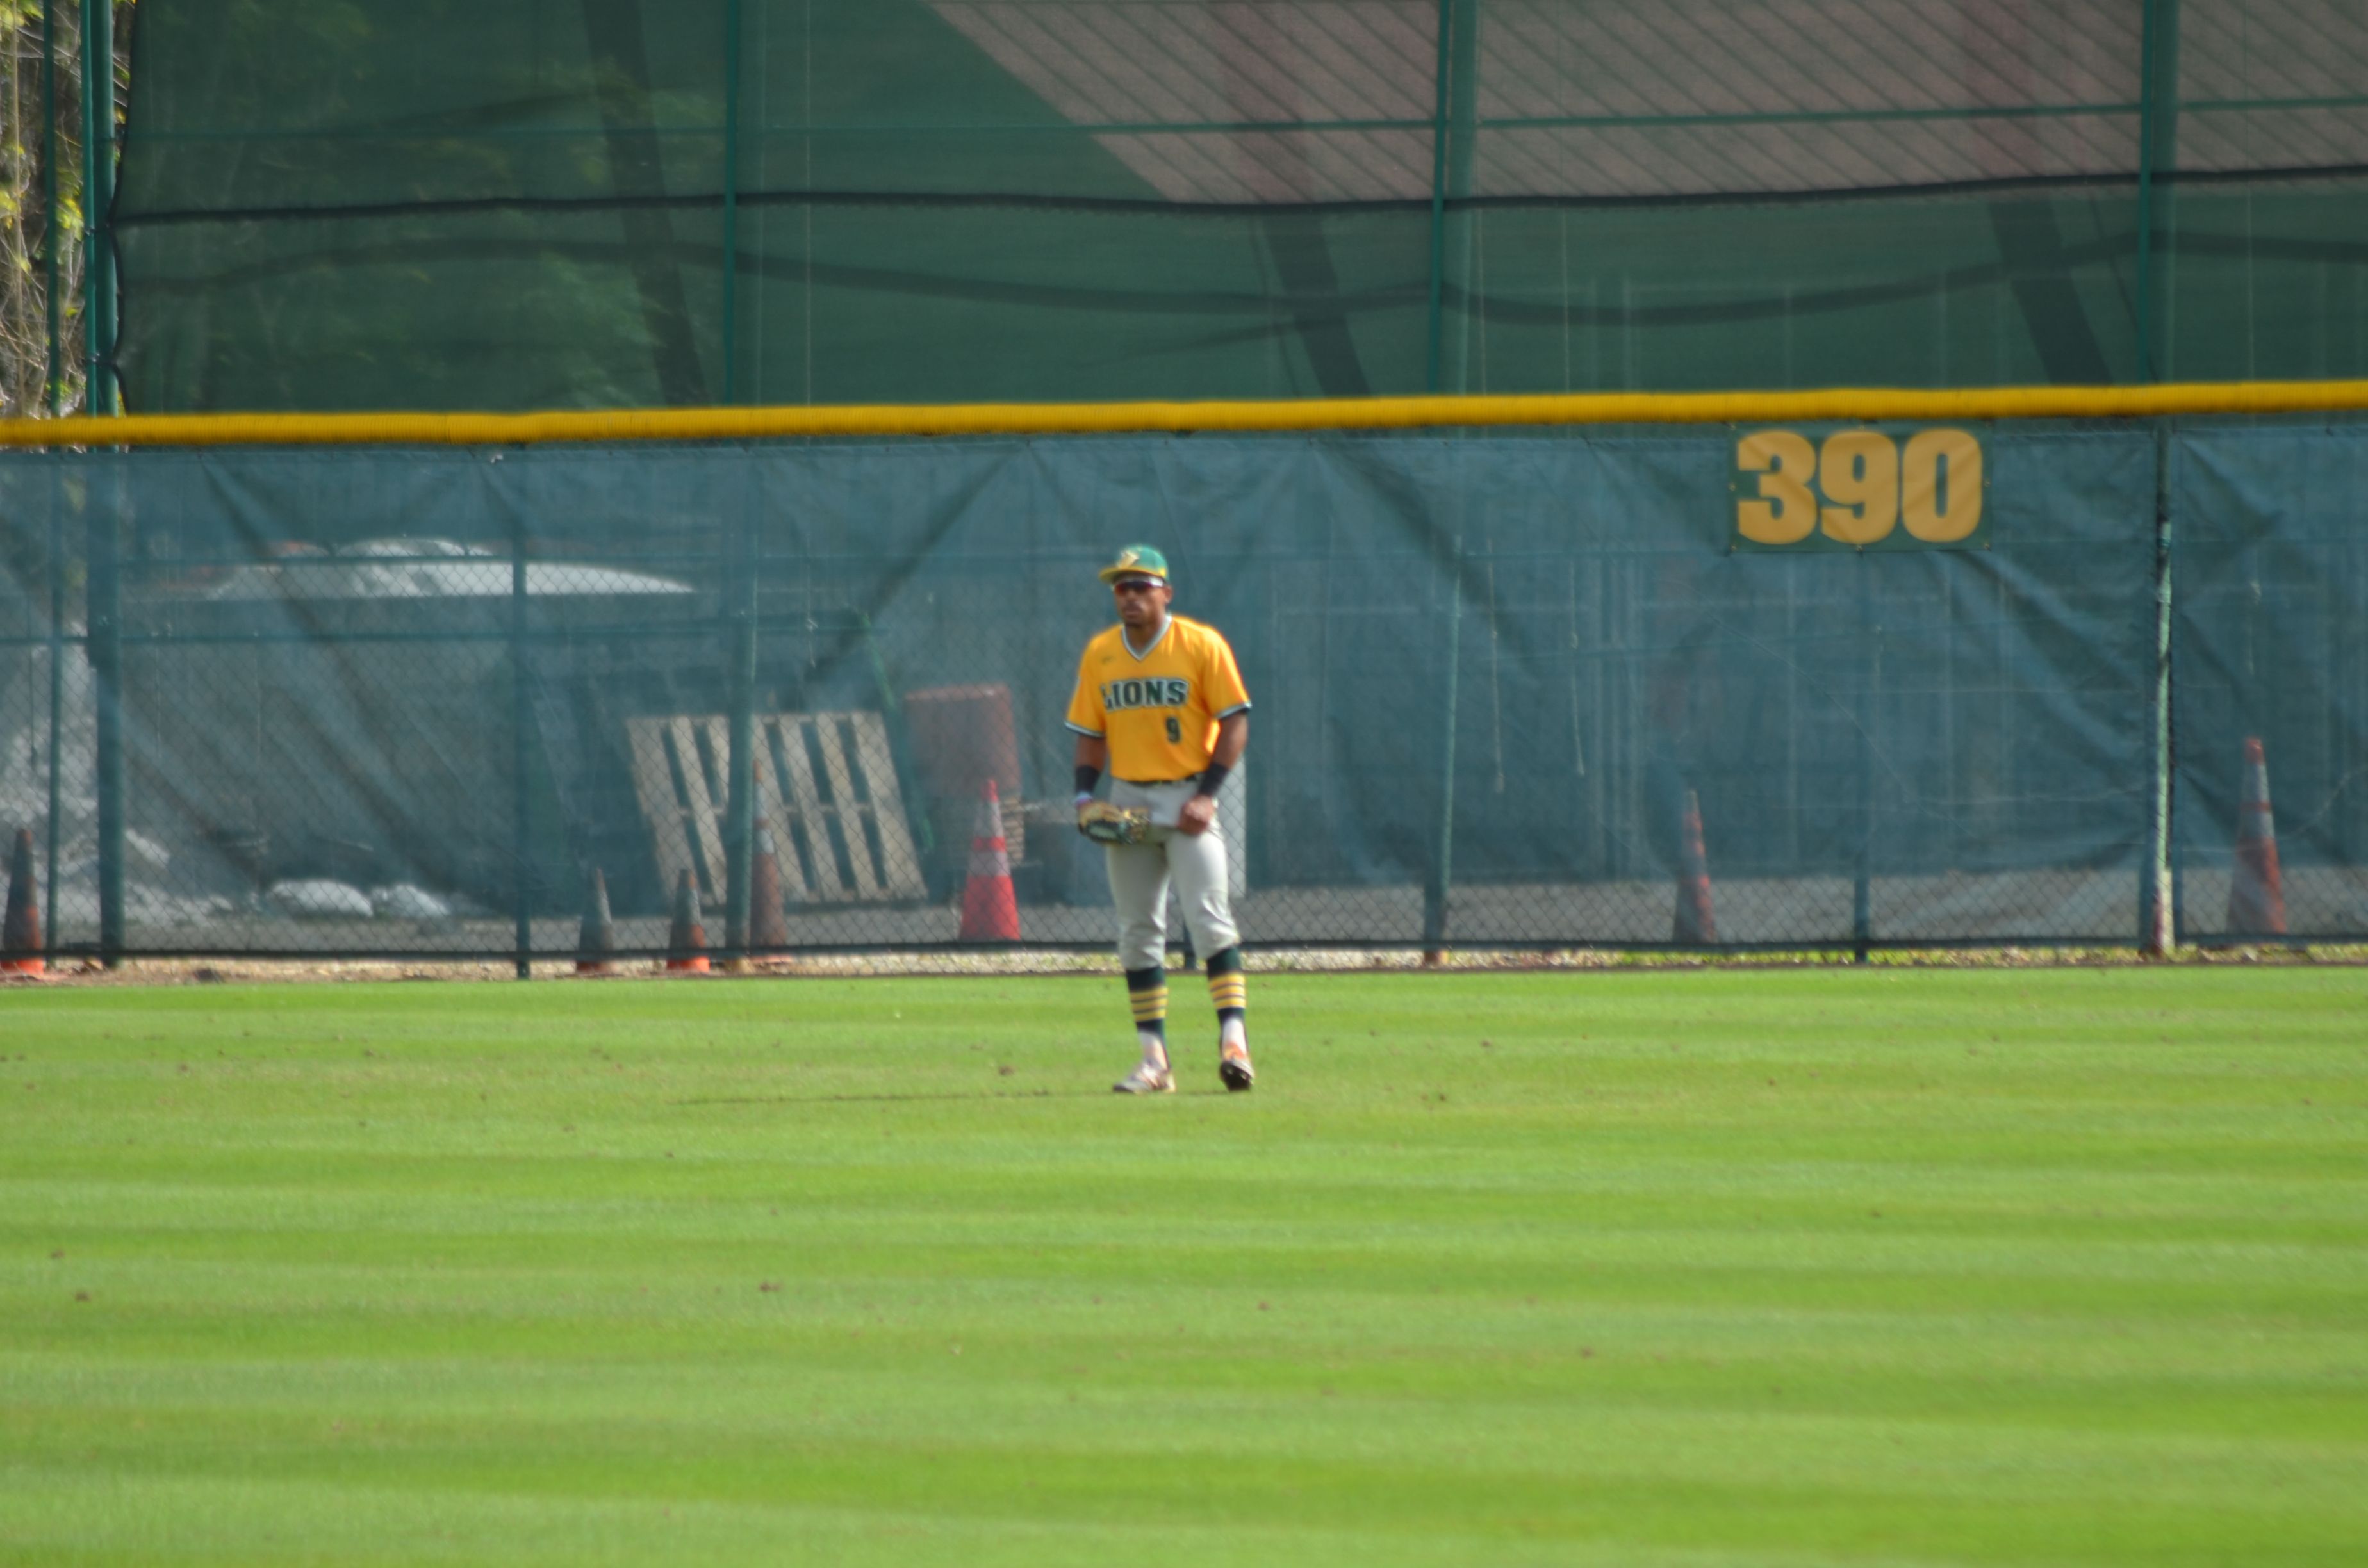 Amir Wright gets ready in the outfield.